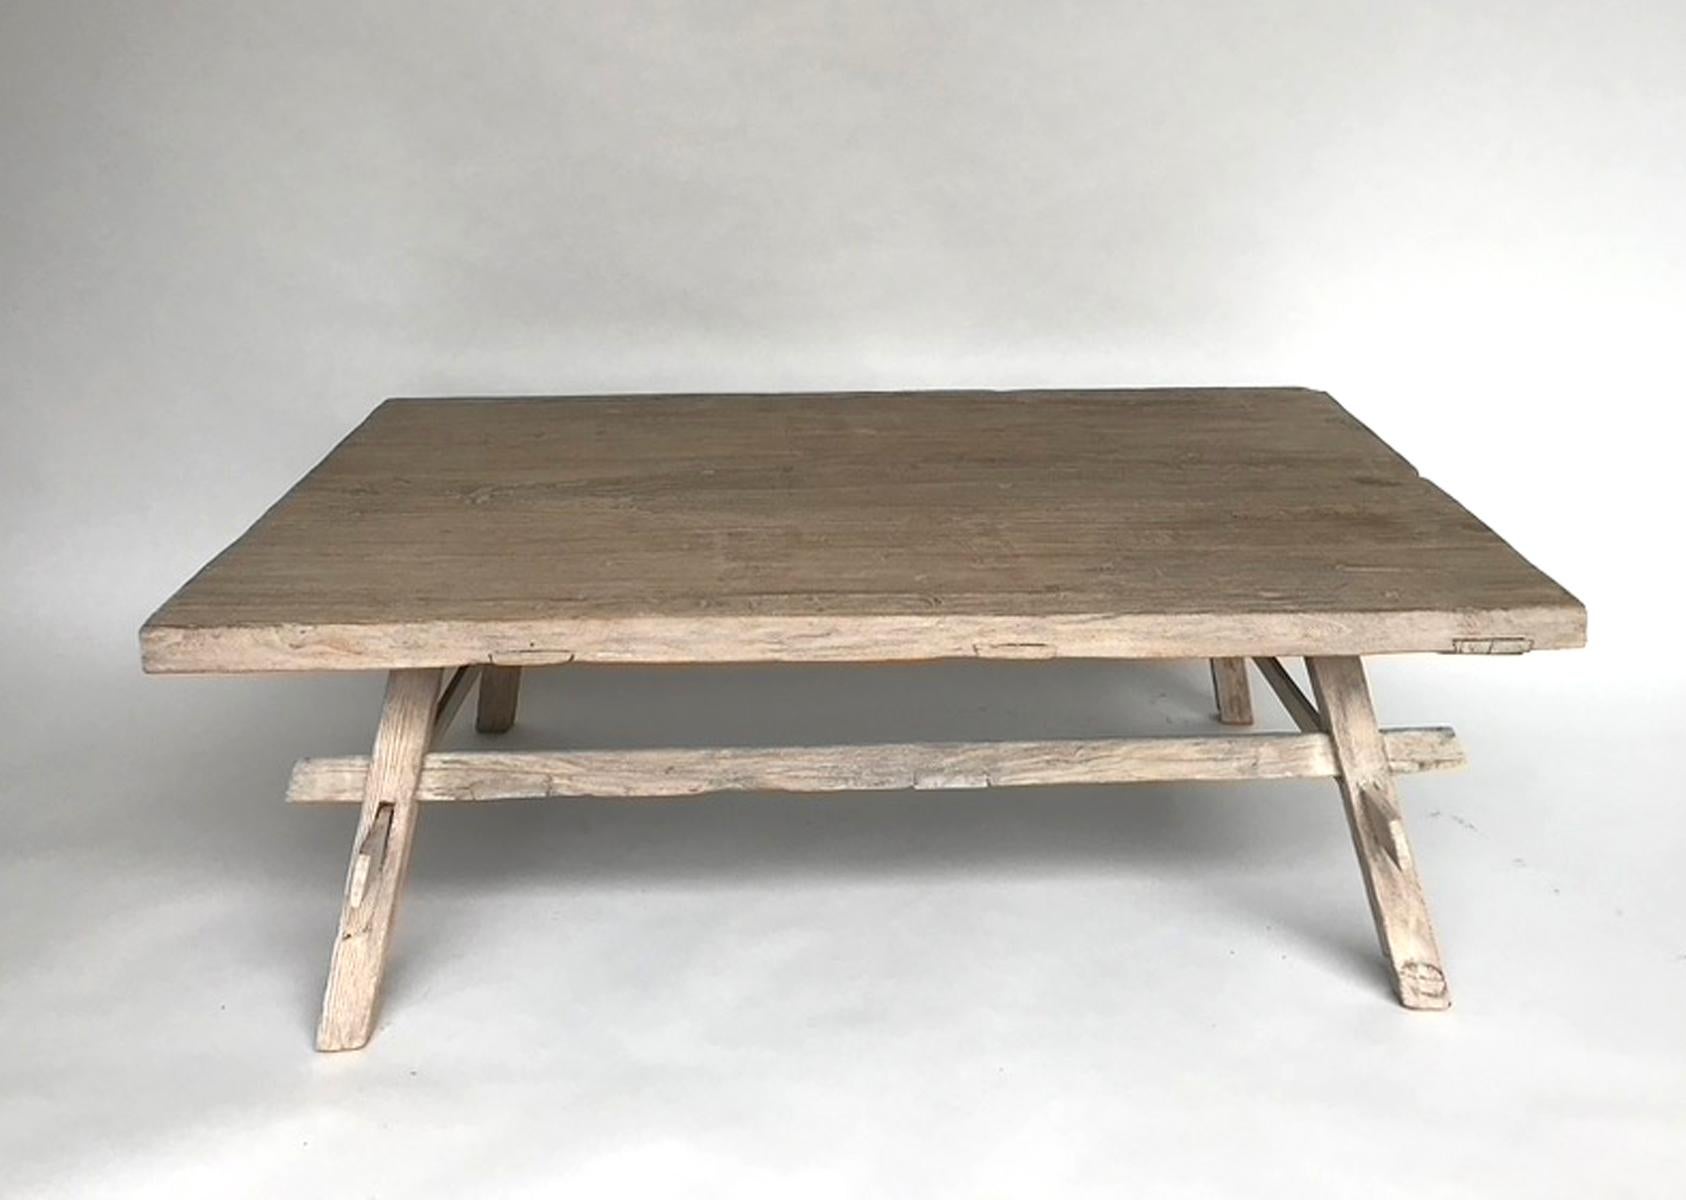 Rustic Japanese Elm Coffee or Cocktail Table